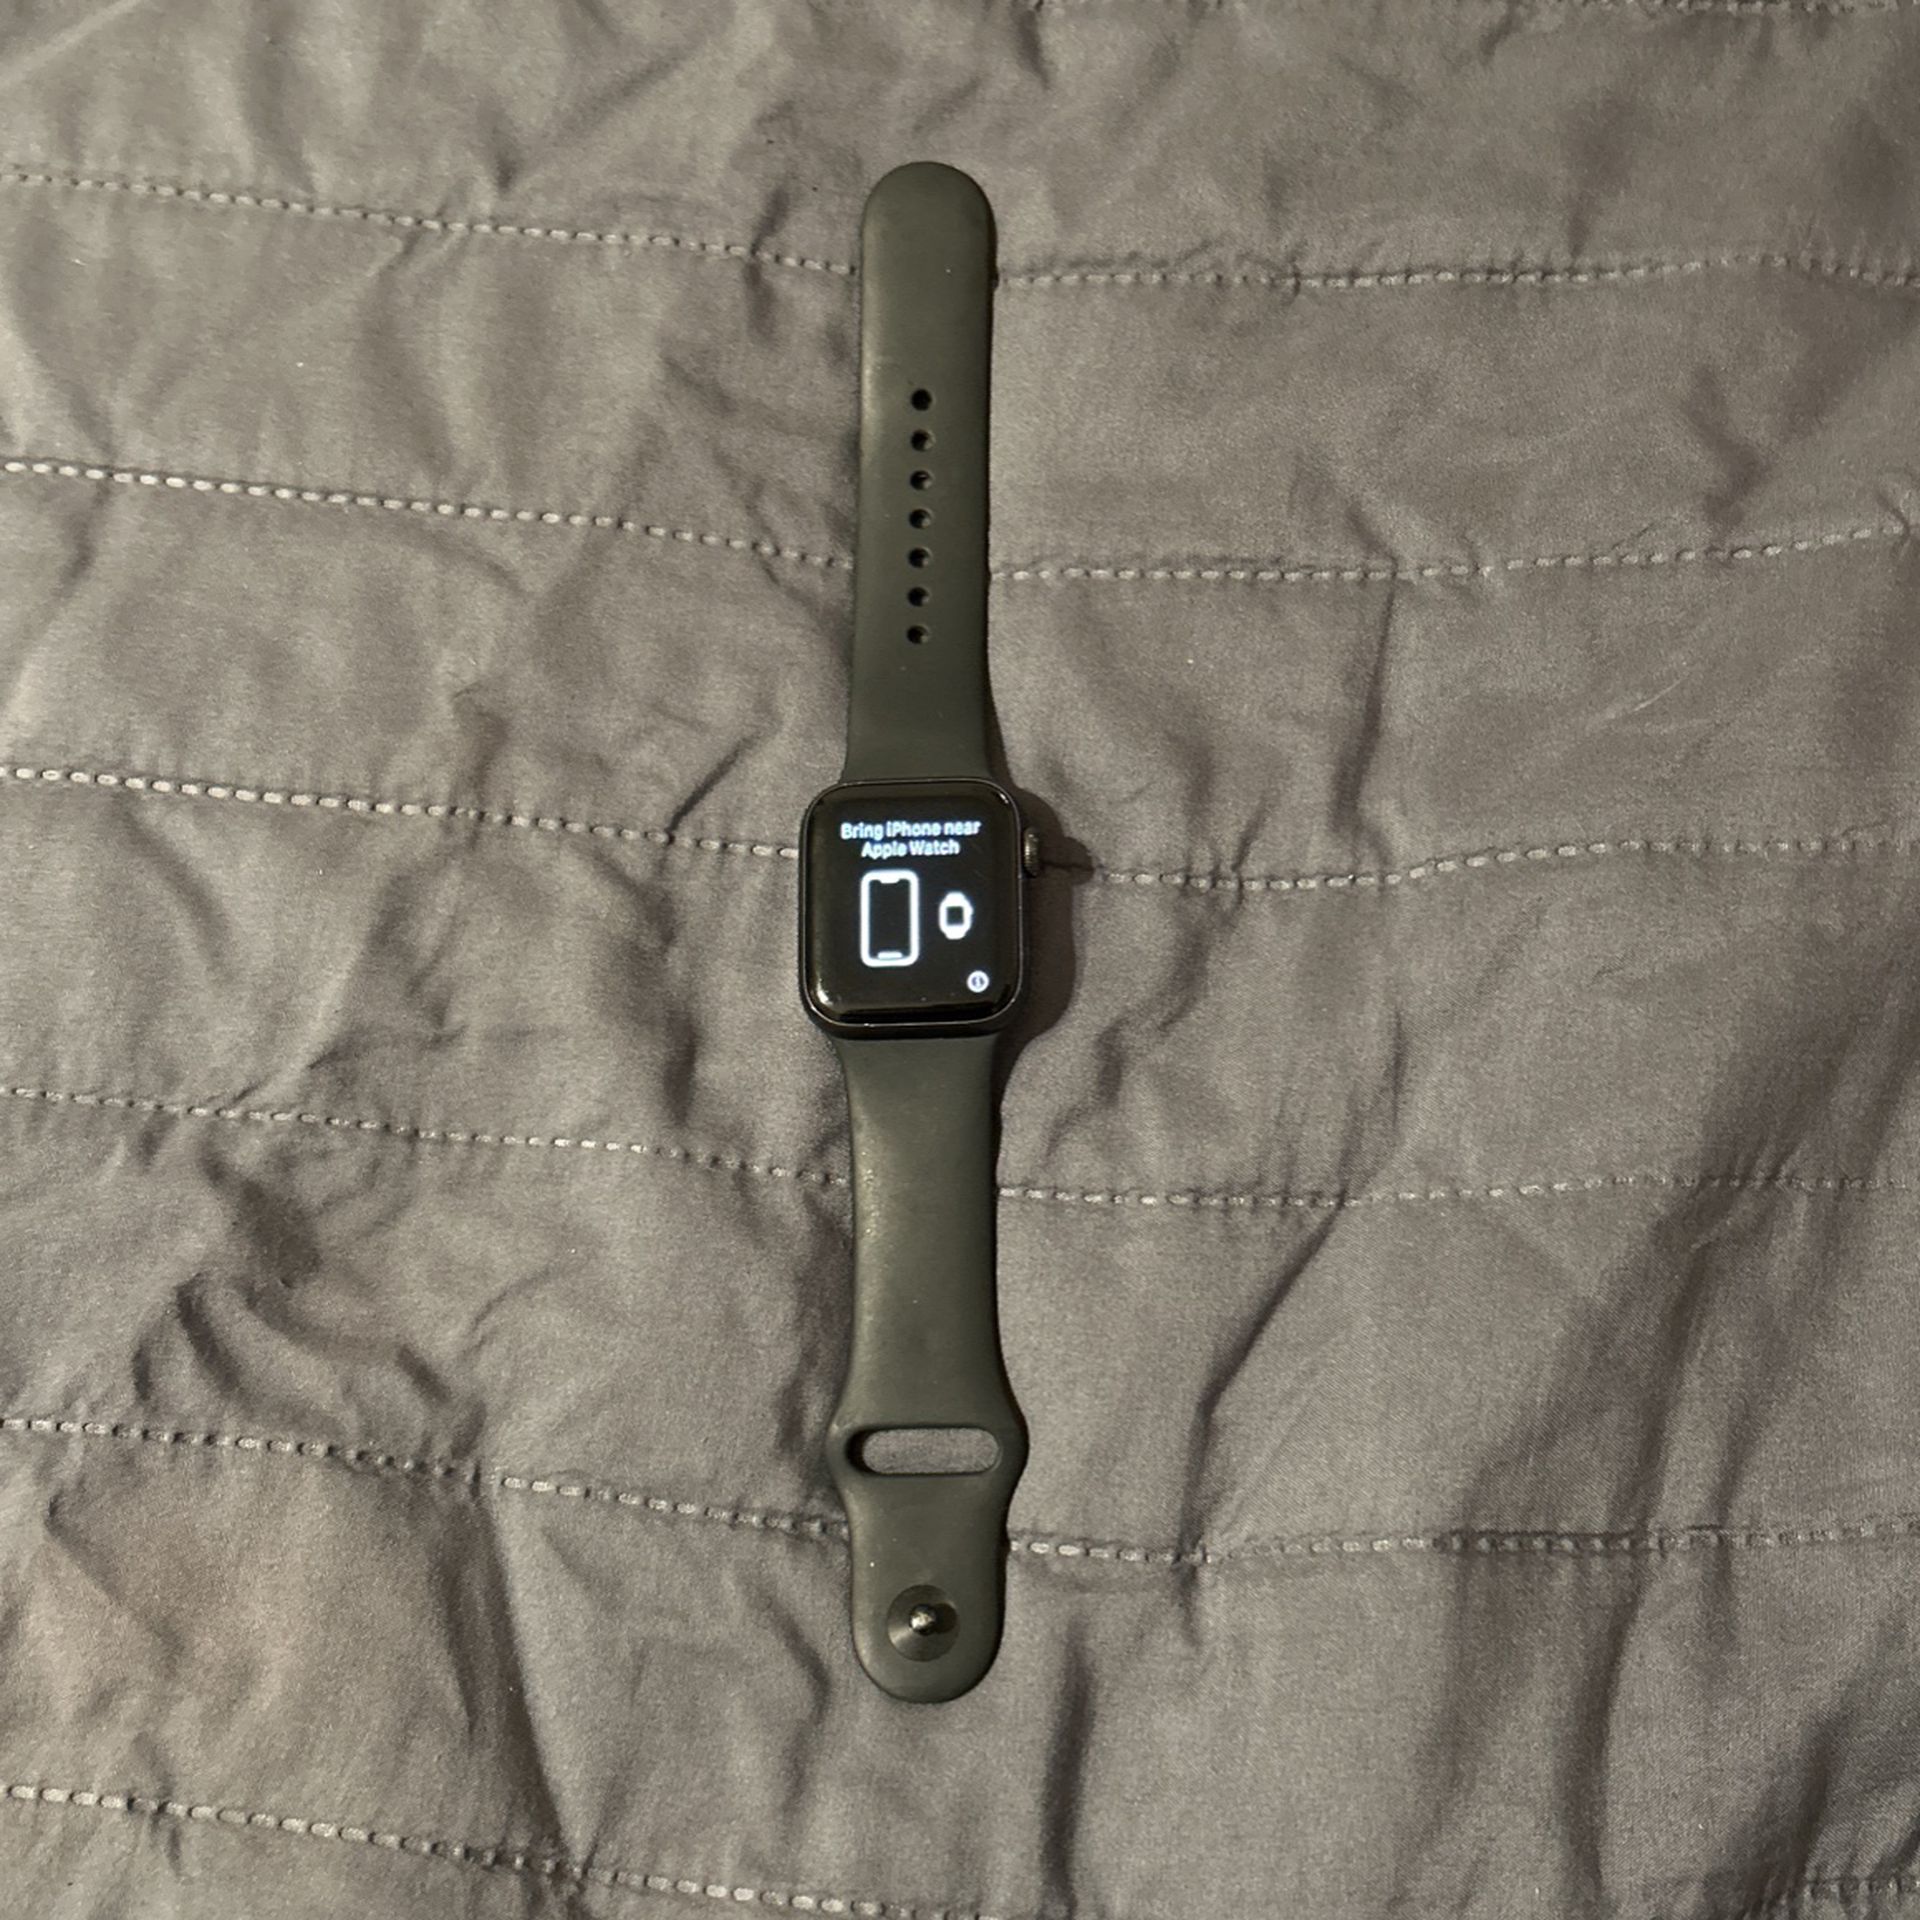 Apple Watch SE Black 44mm Price Is For Both